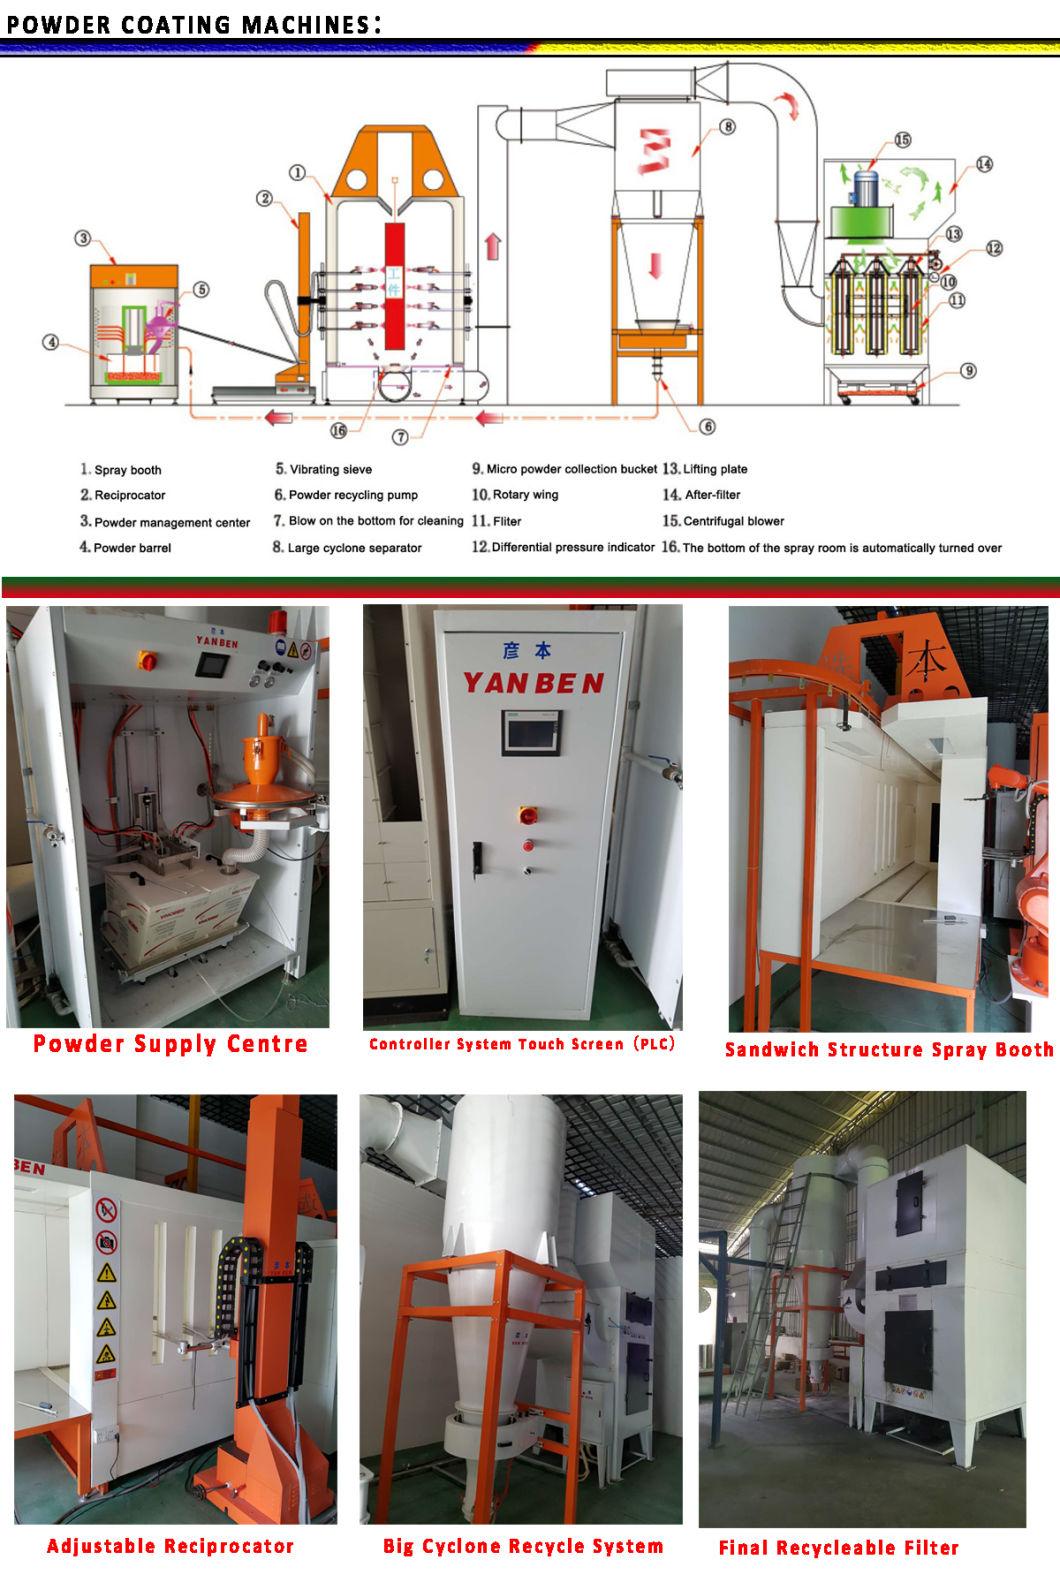 High-Efficiency Powder Painting Reciprocator for Automatic Powder Coating Machine